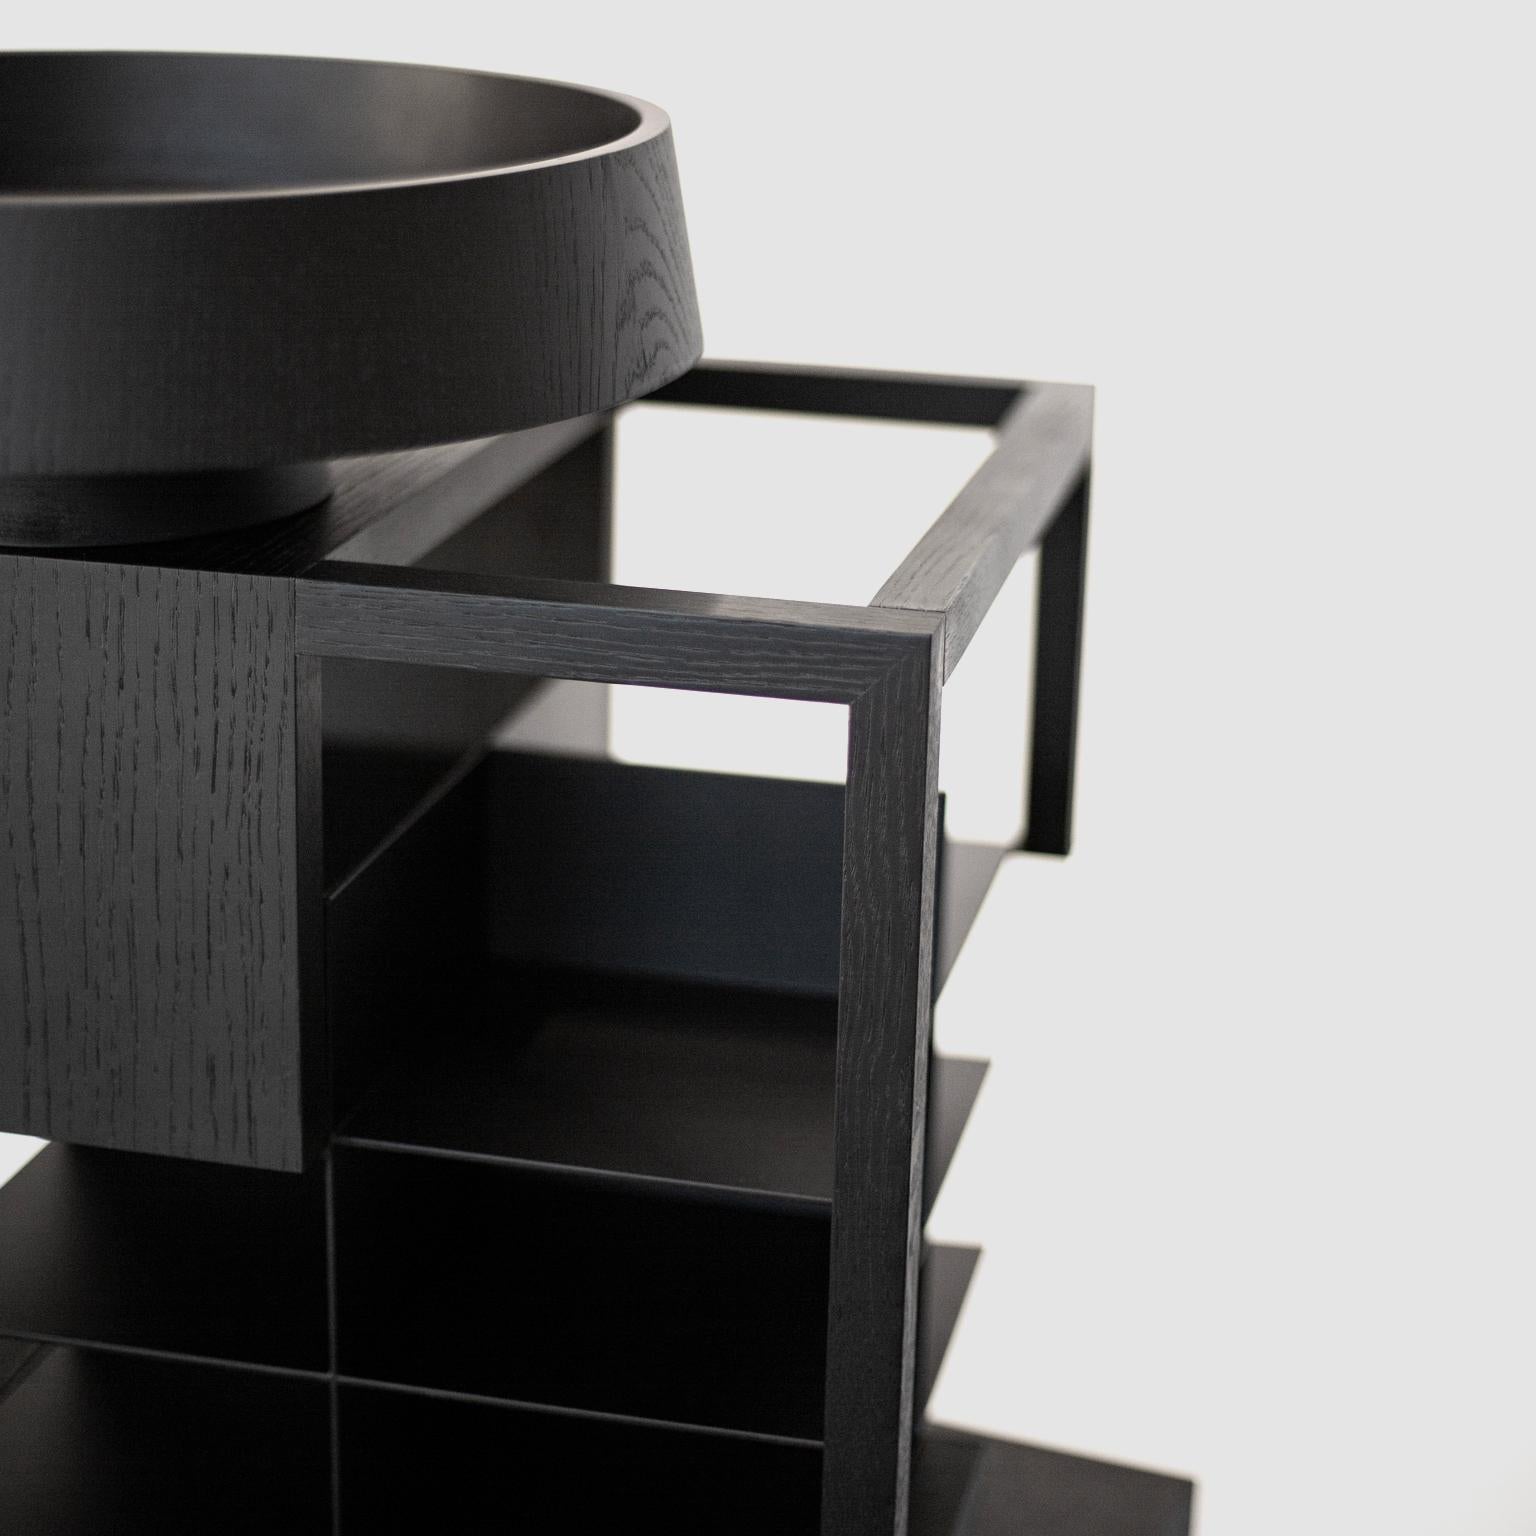 Arts and Crafts Contemporary Storage or Sculpture Etagere HIRO by Studio1+11, 21st Century   